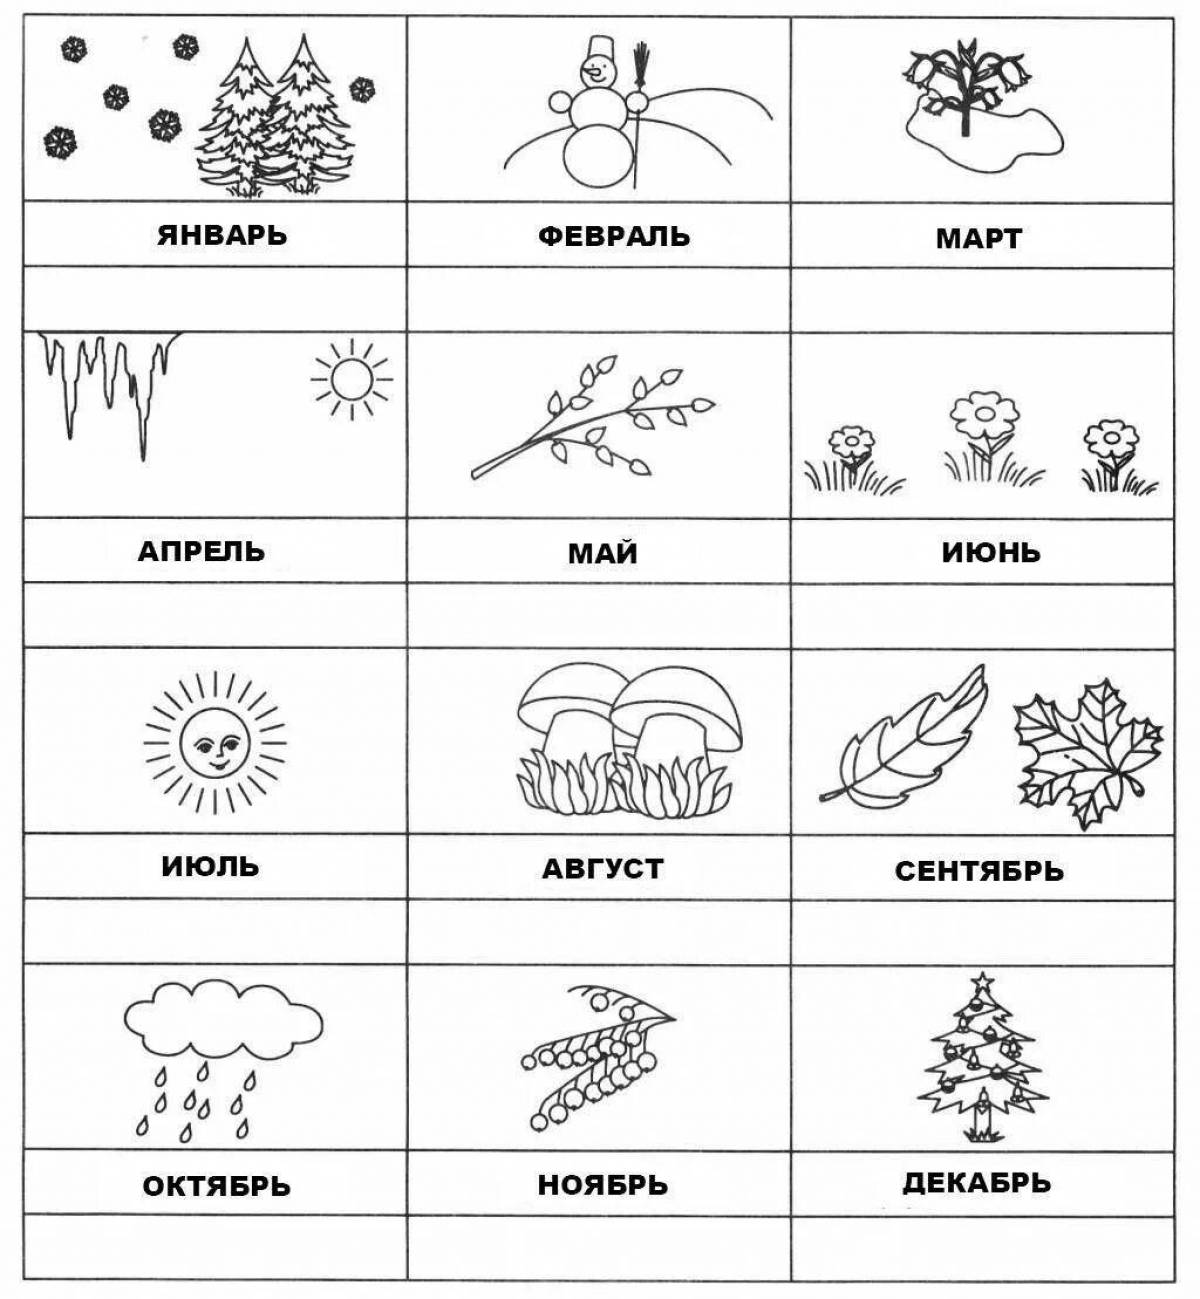 Coloring pages by months of the year for kids